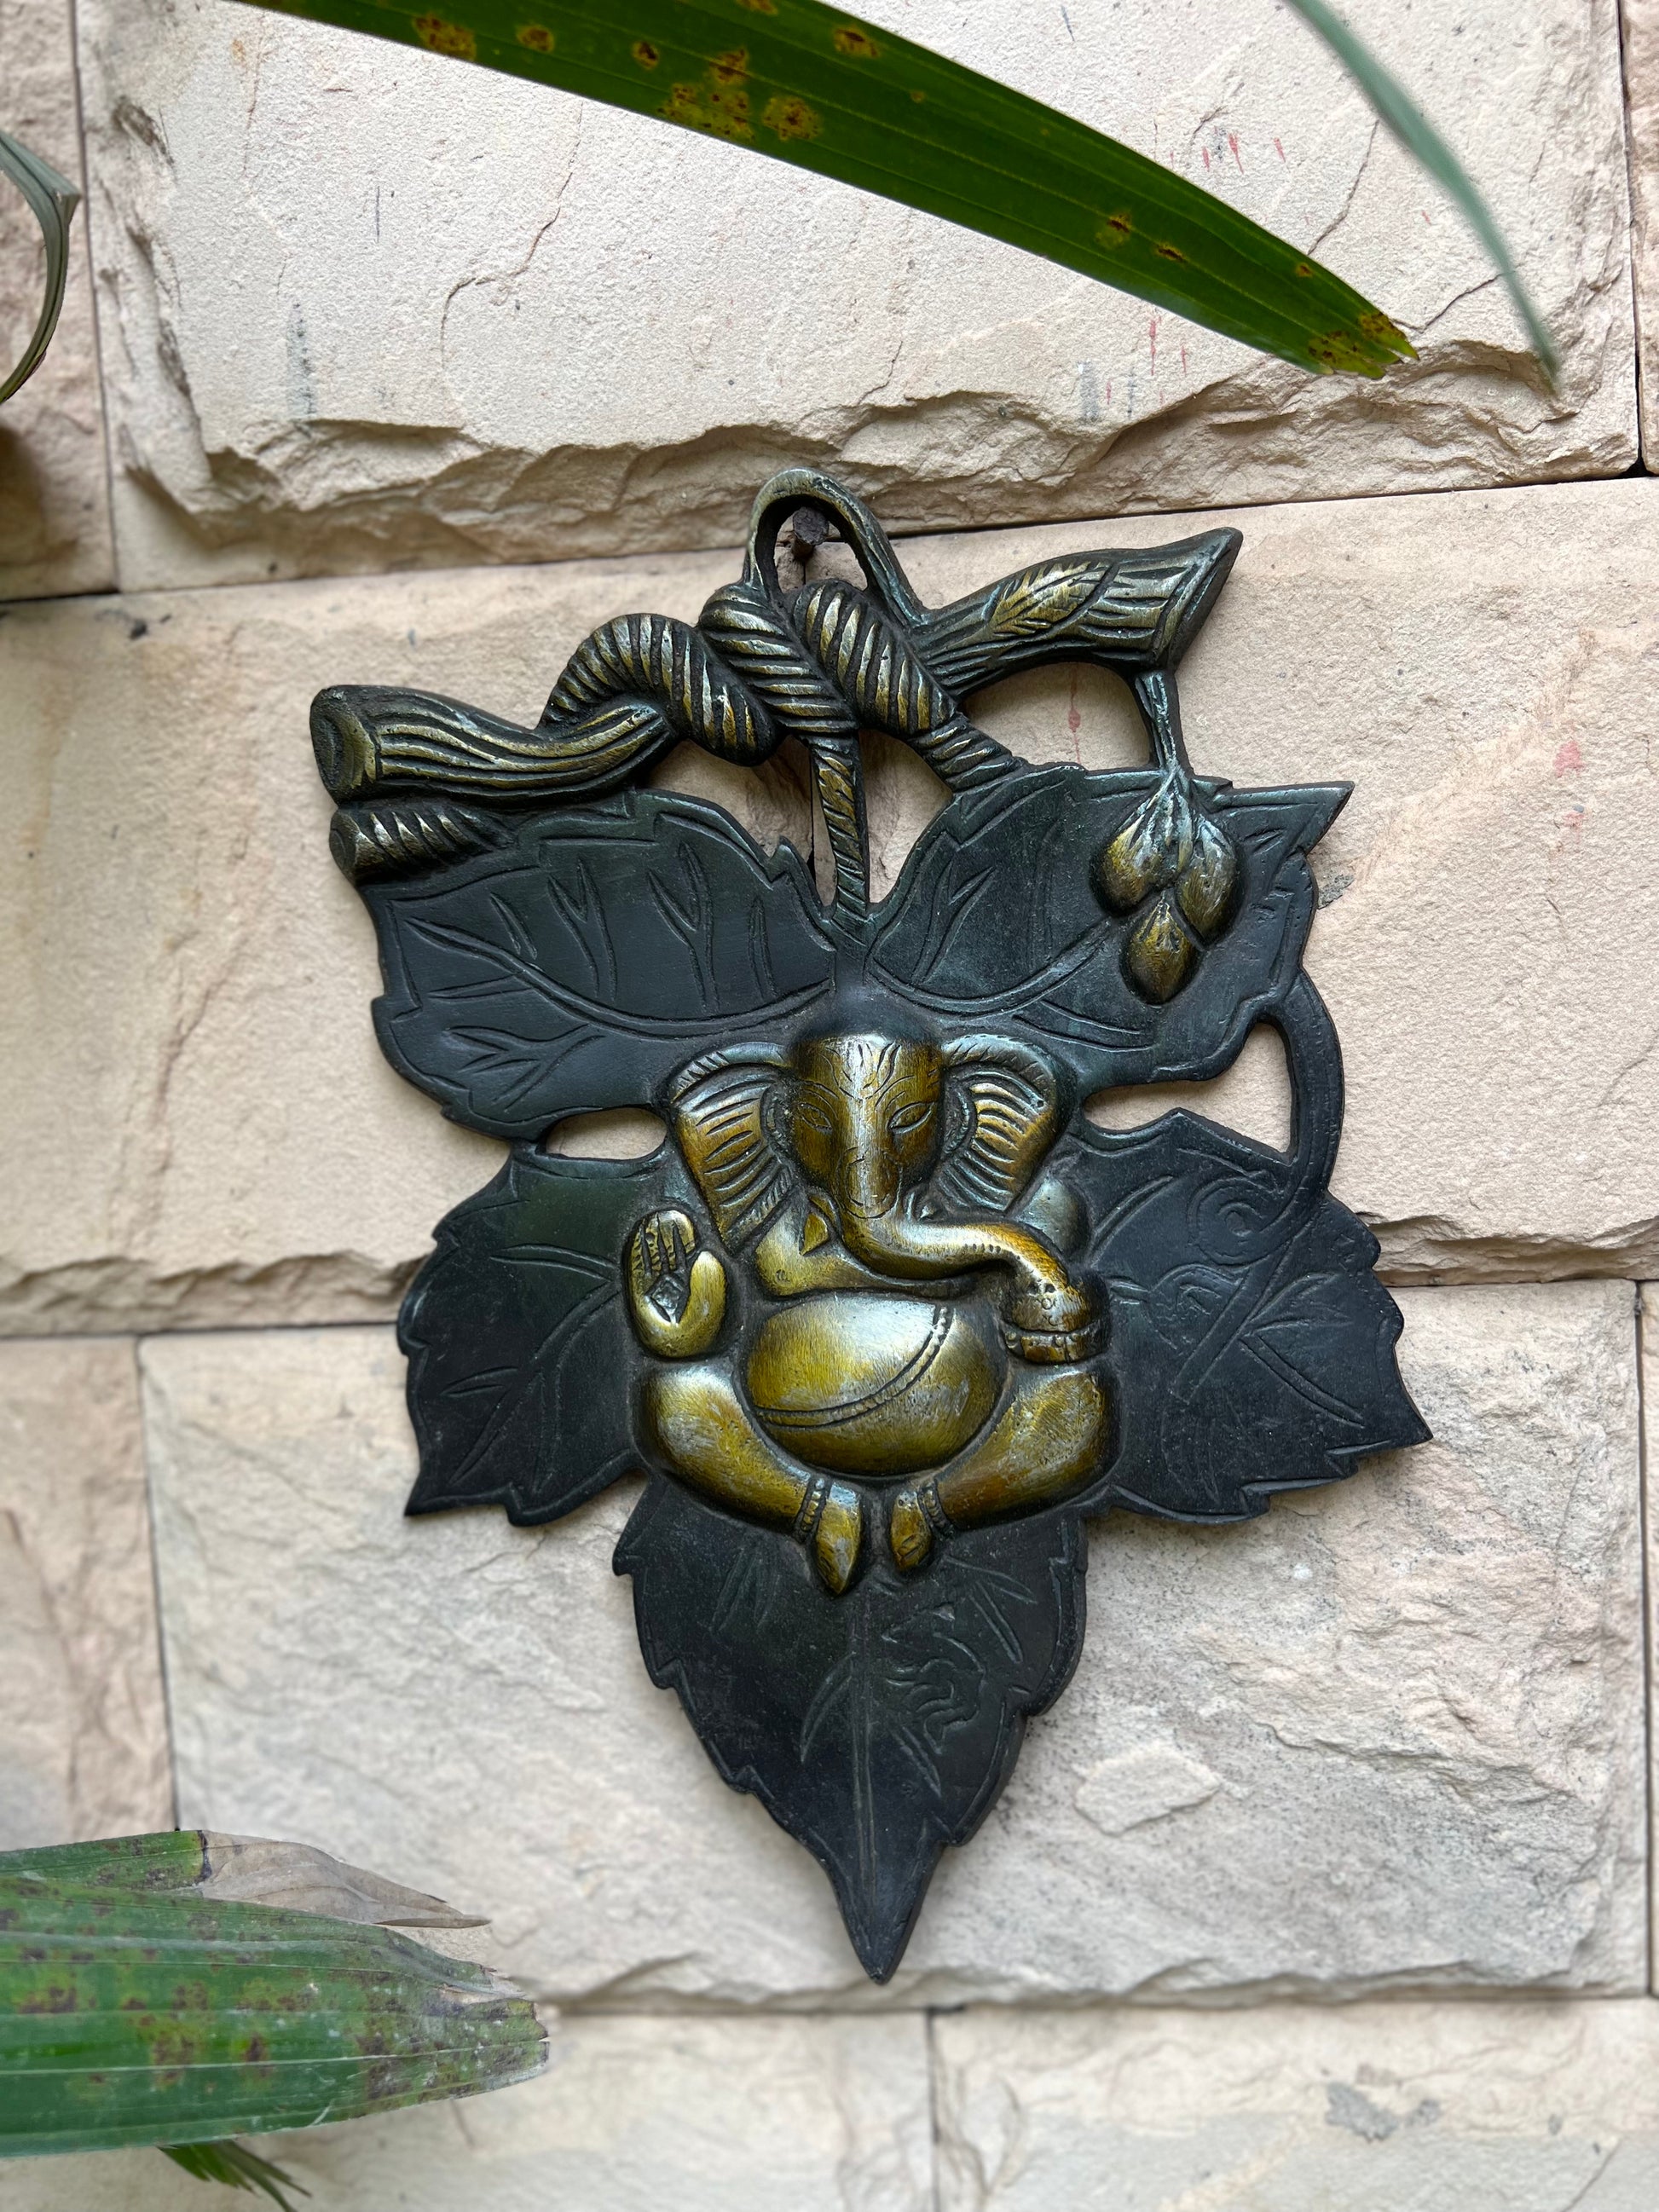 Elegant and Traditional Ganesh Iron Wall hanging.   The Source India is an Indian Handicraft, Home Decor, Furnishing and Textiles Store. Based out of Hauz Khas Village New Delhi, each piece is carefully procured to allow the enhancement of India's Culture.